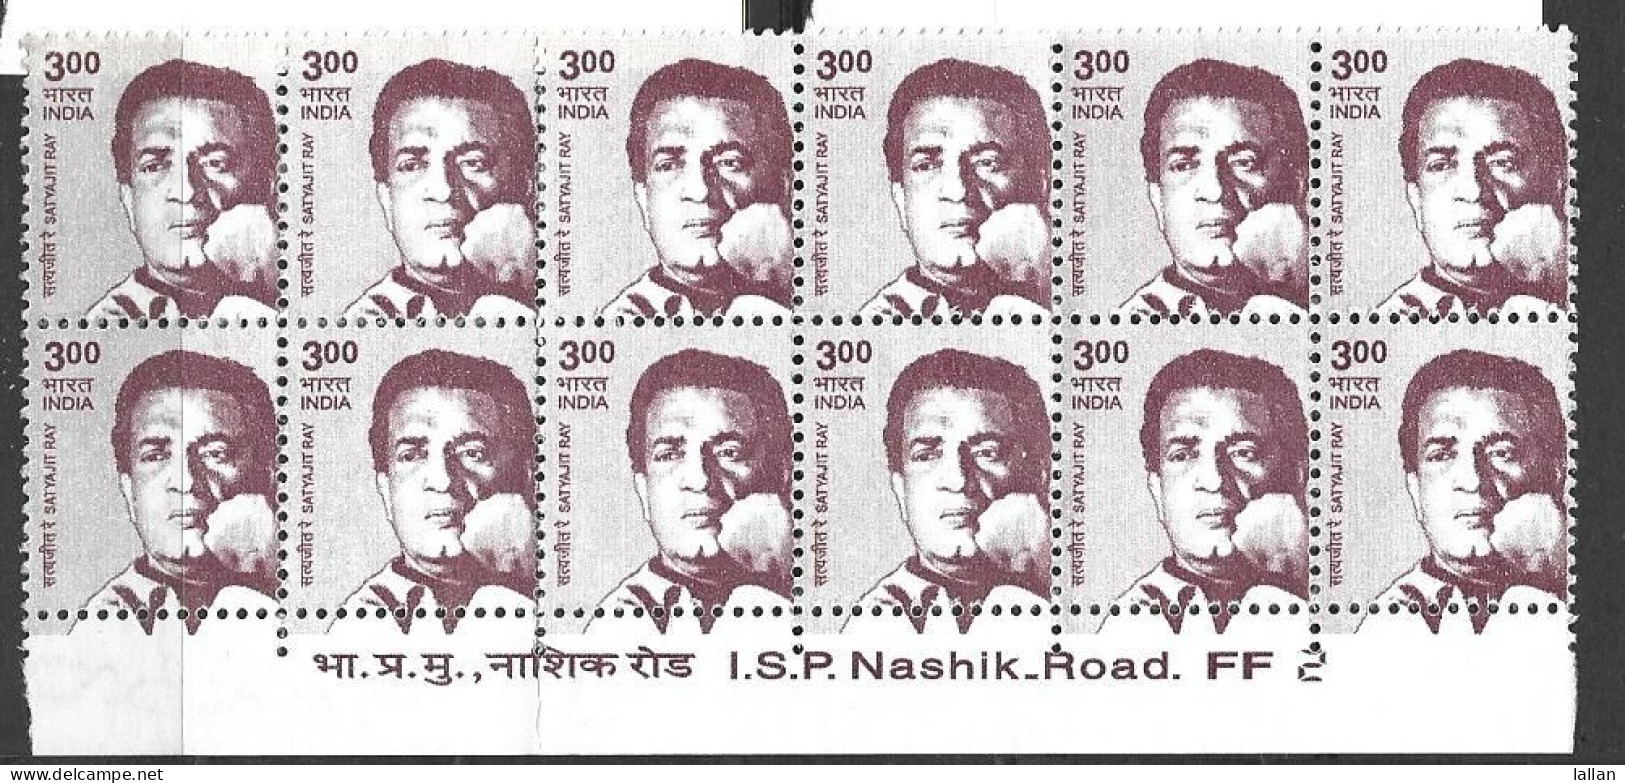 3 Blk Of 4, MNH, Satyajeet Ray, Life Time Acheivement Oscar, Cinema, Condition As Per Scan - Nuovi